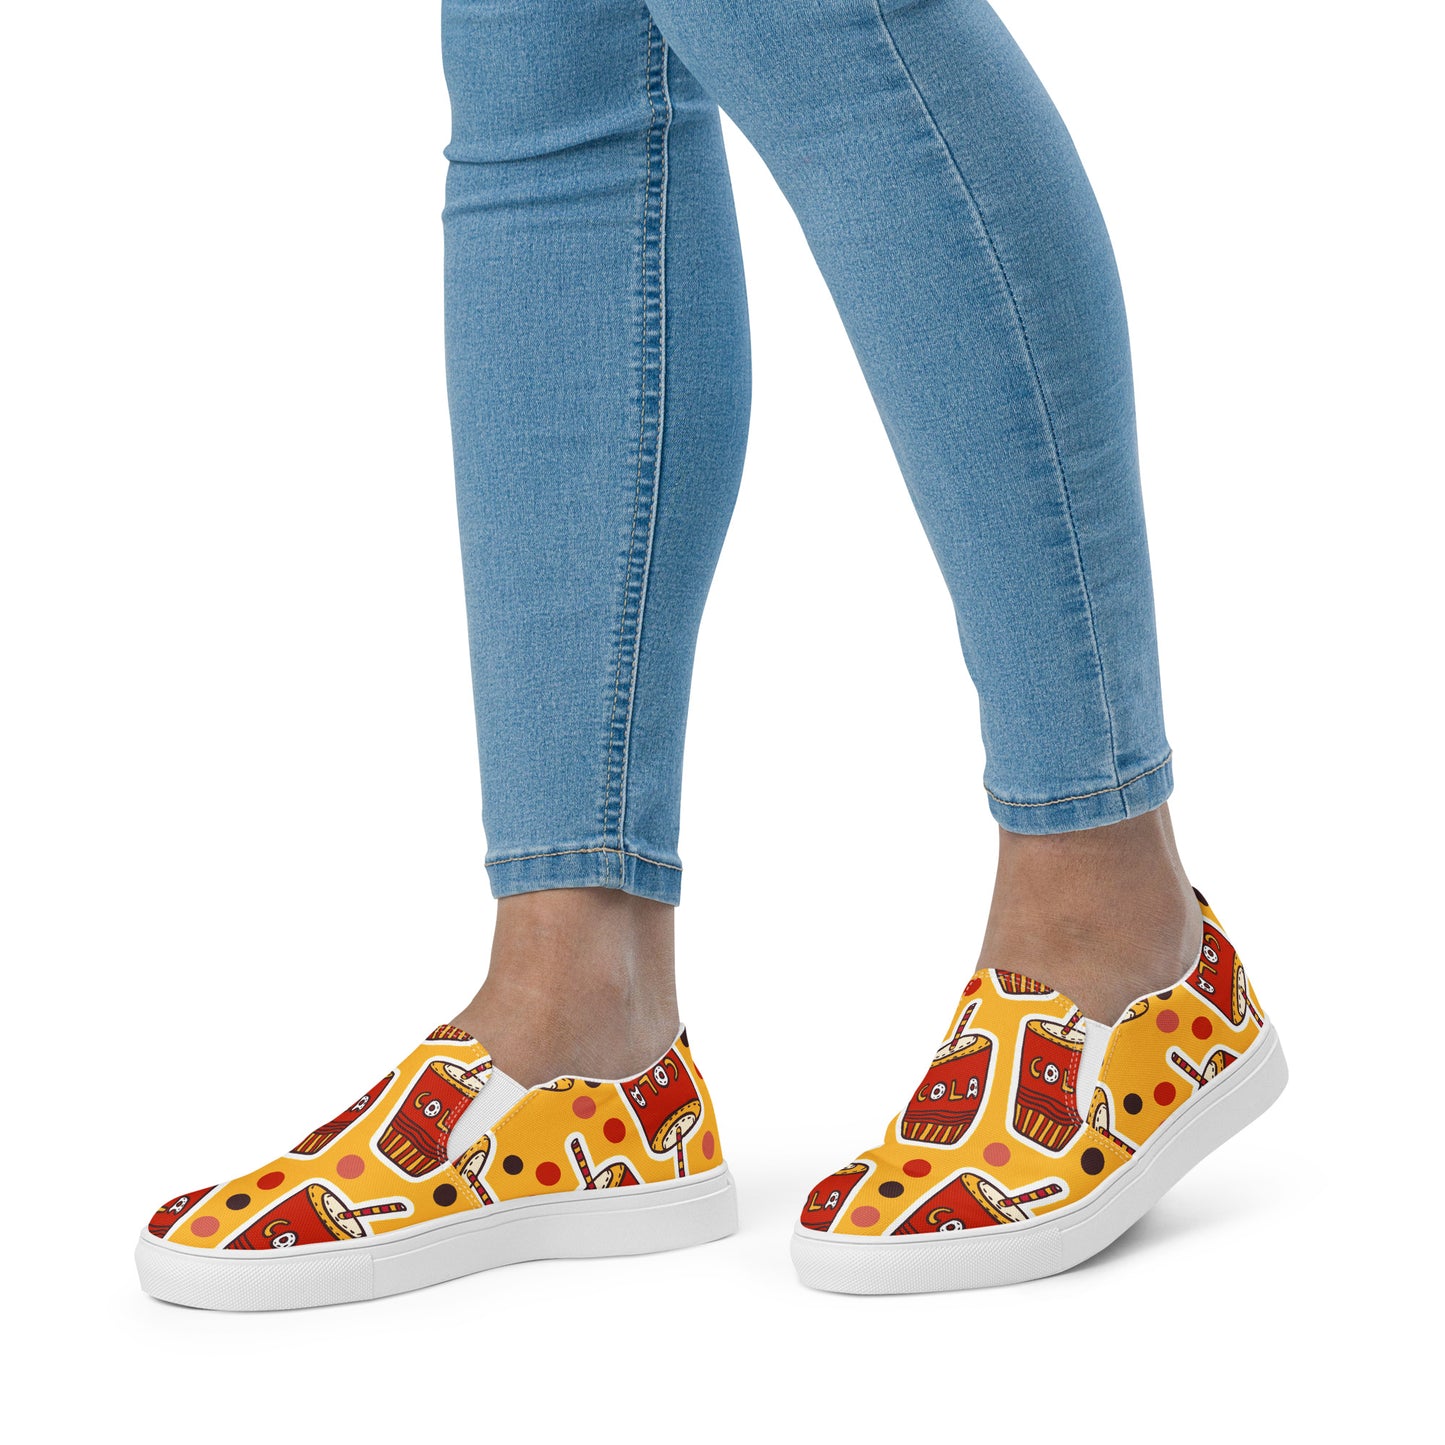 Cola - Women’s slip-on canvas shoes Womens Slip On Shoes